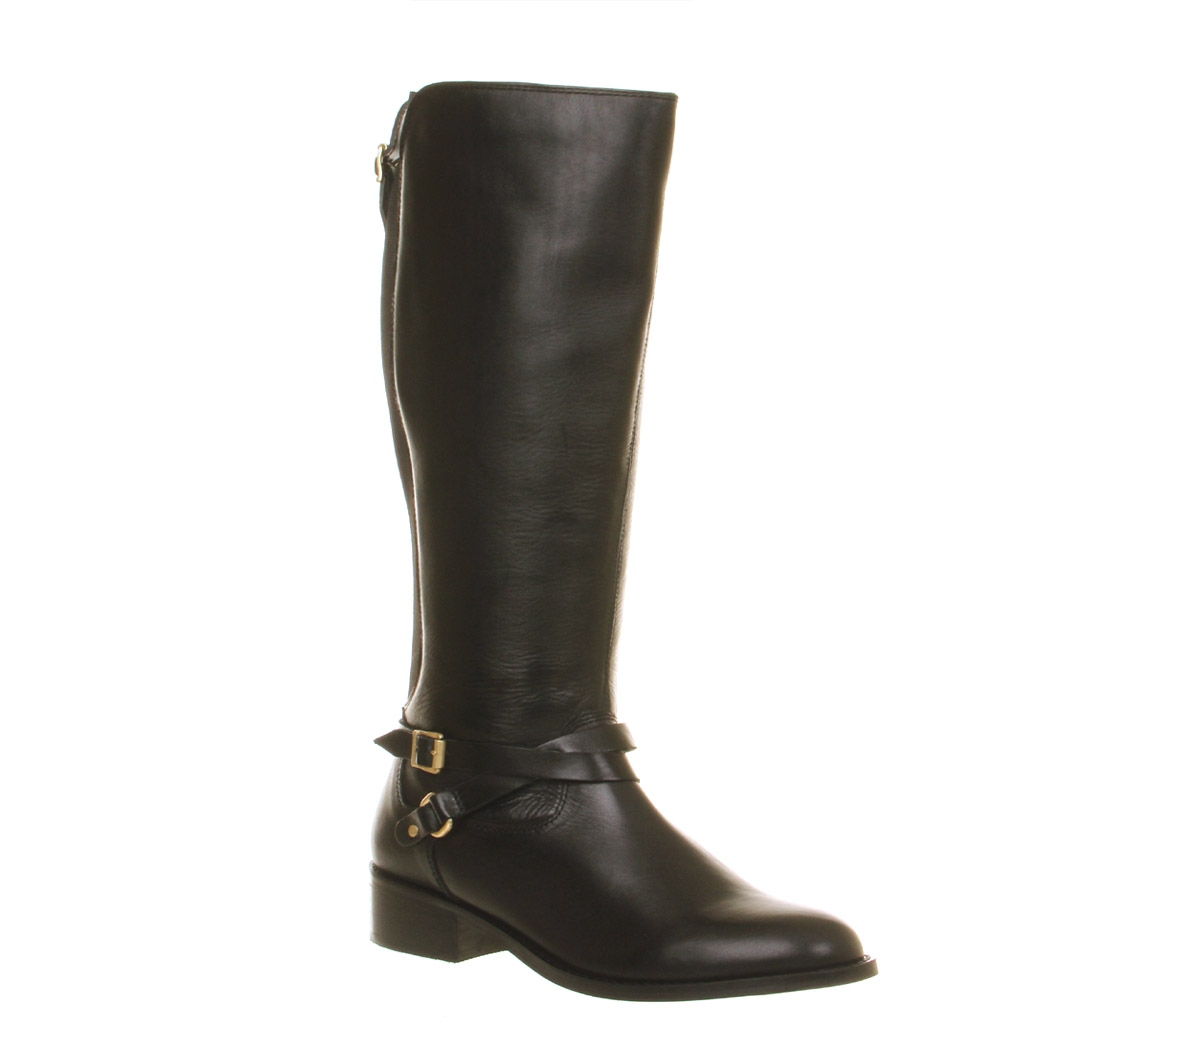 OFFICE National Smart Elastic Rider Black Leather - Knee High Boots